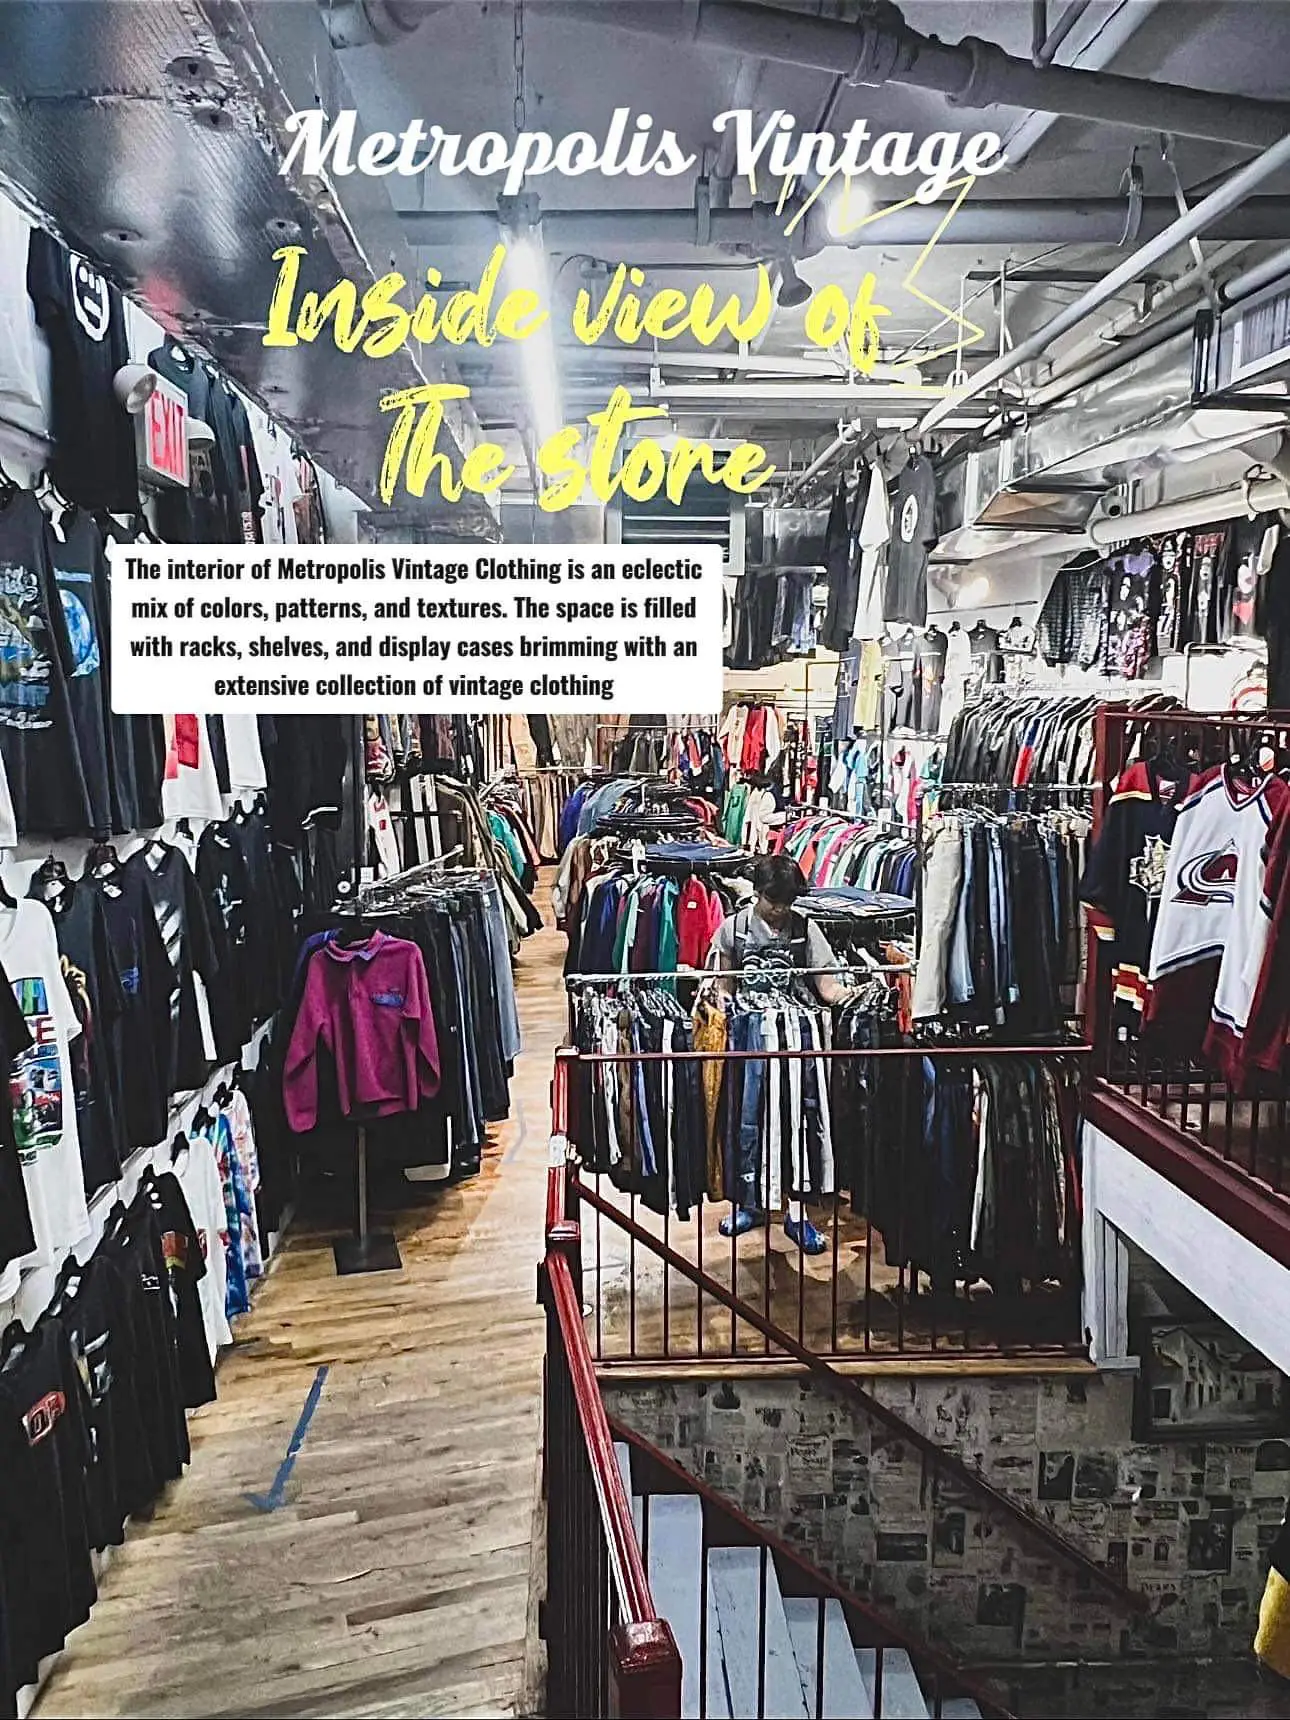  A store with a large collection of vintage clothing on shelves and